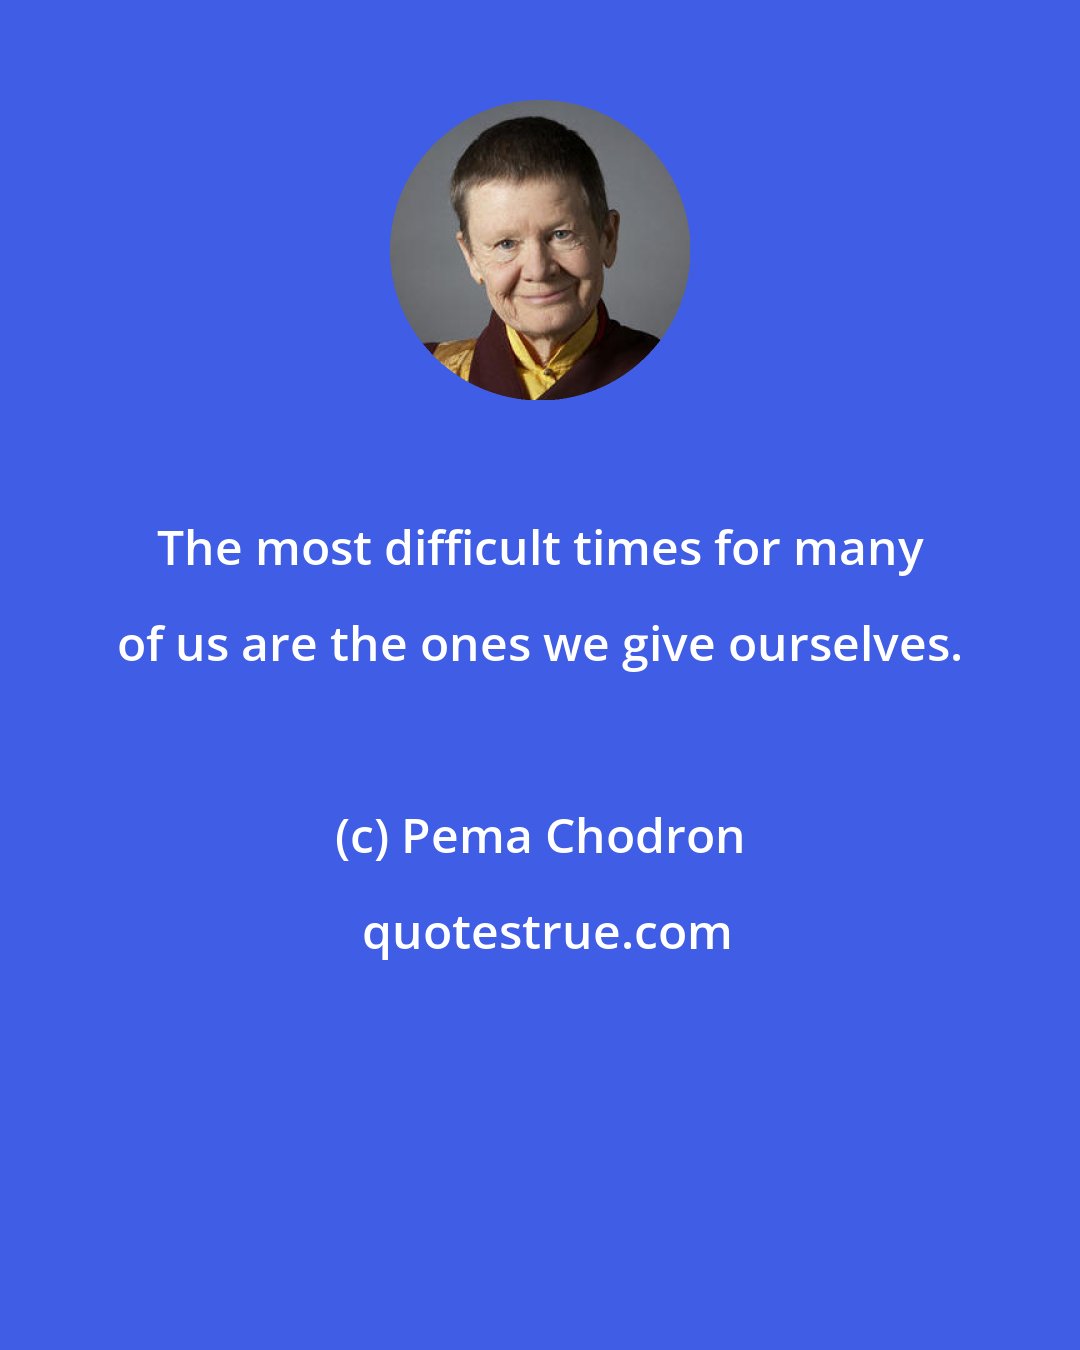 Pema Chodron: The most difficult times for many of us are the ones we give ourselves.